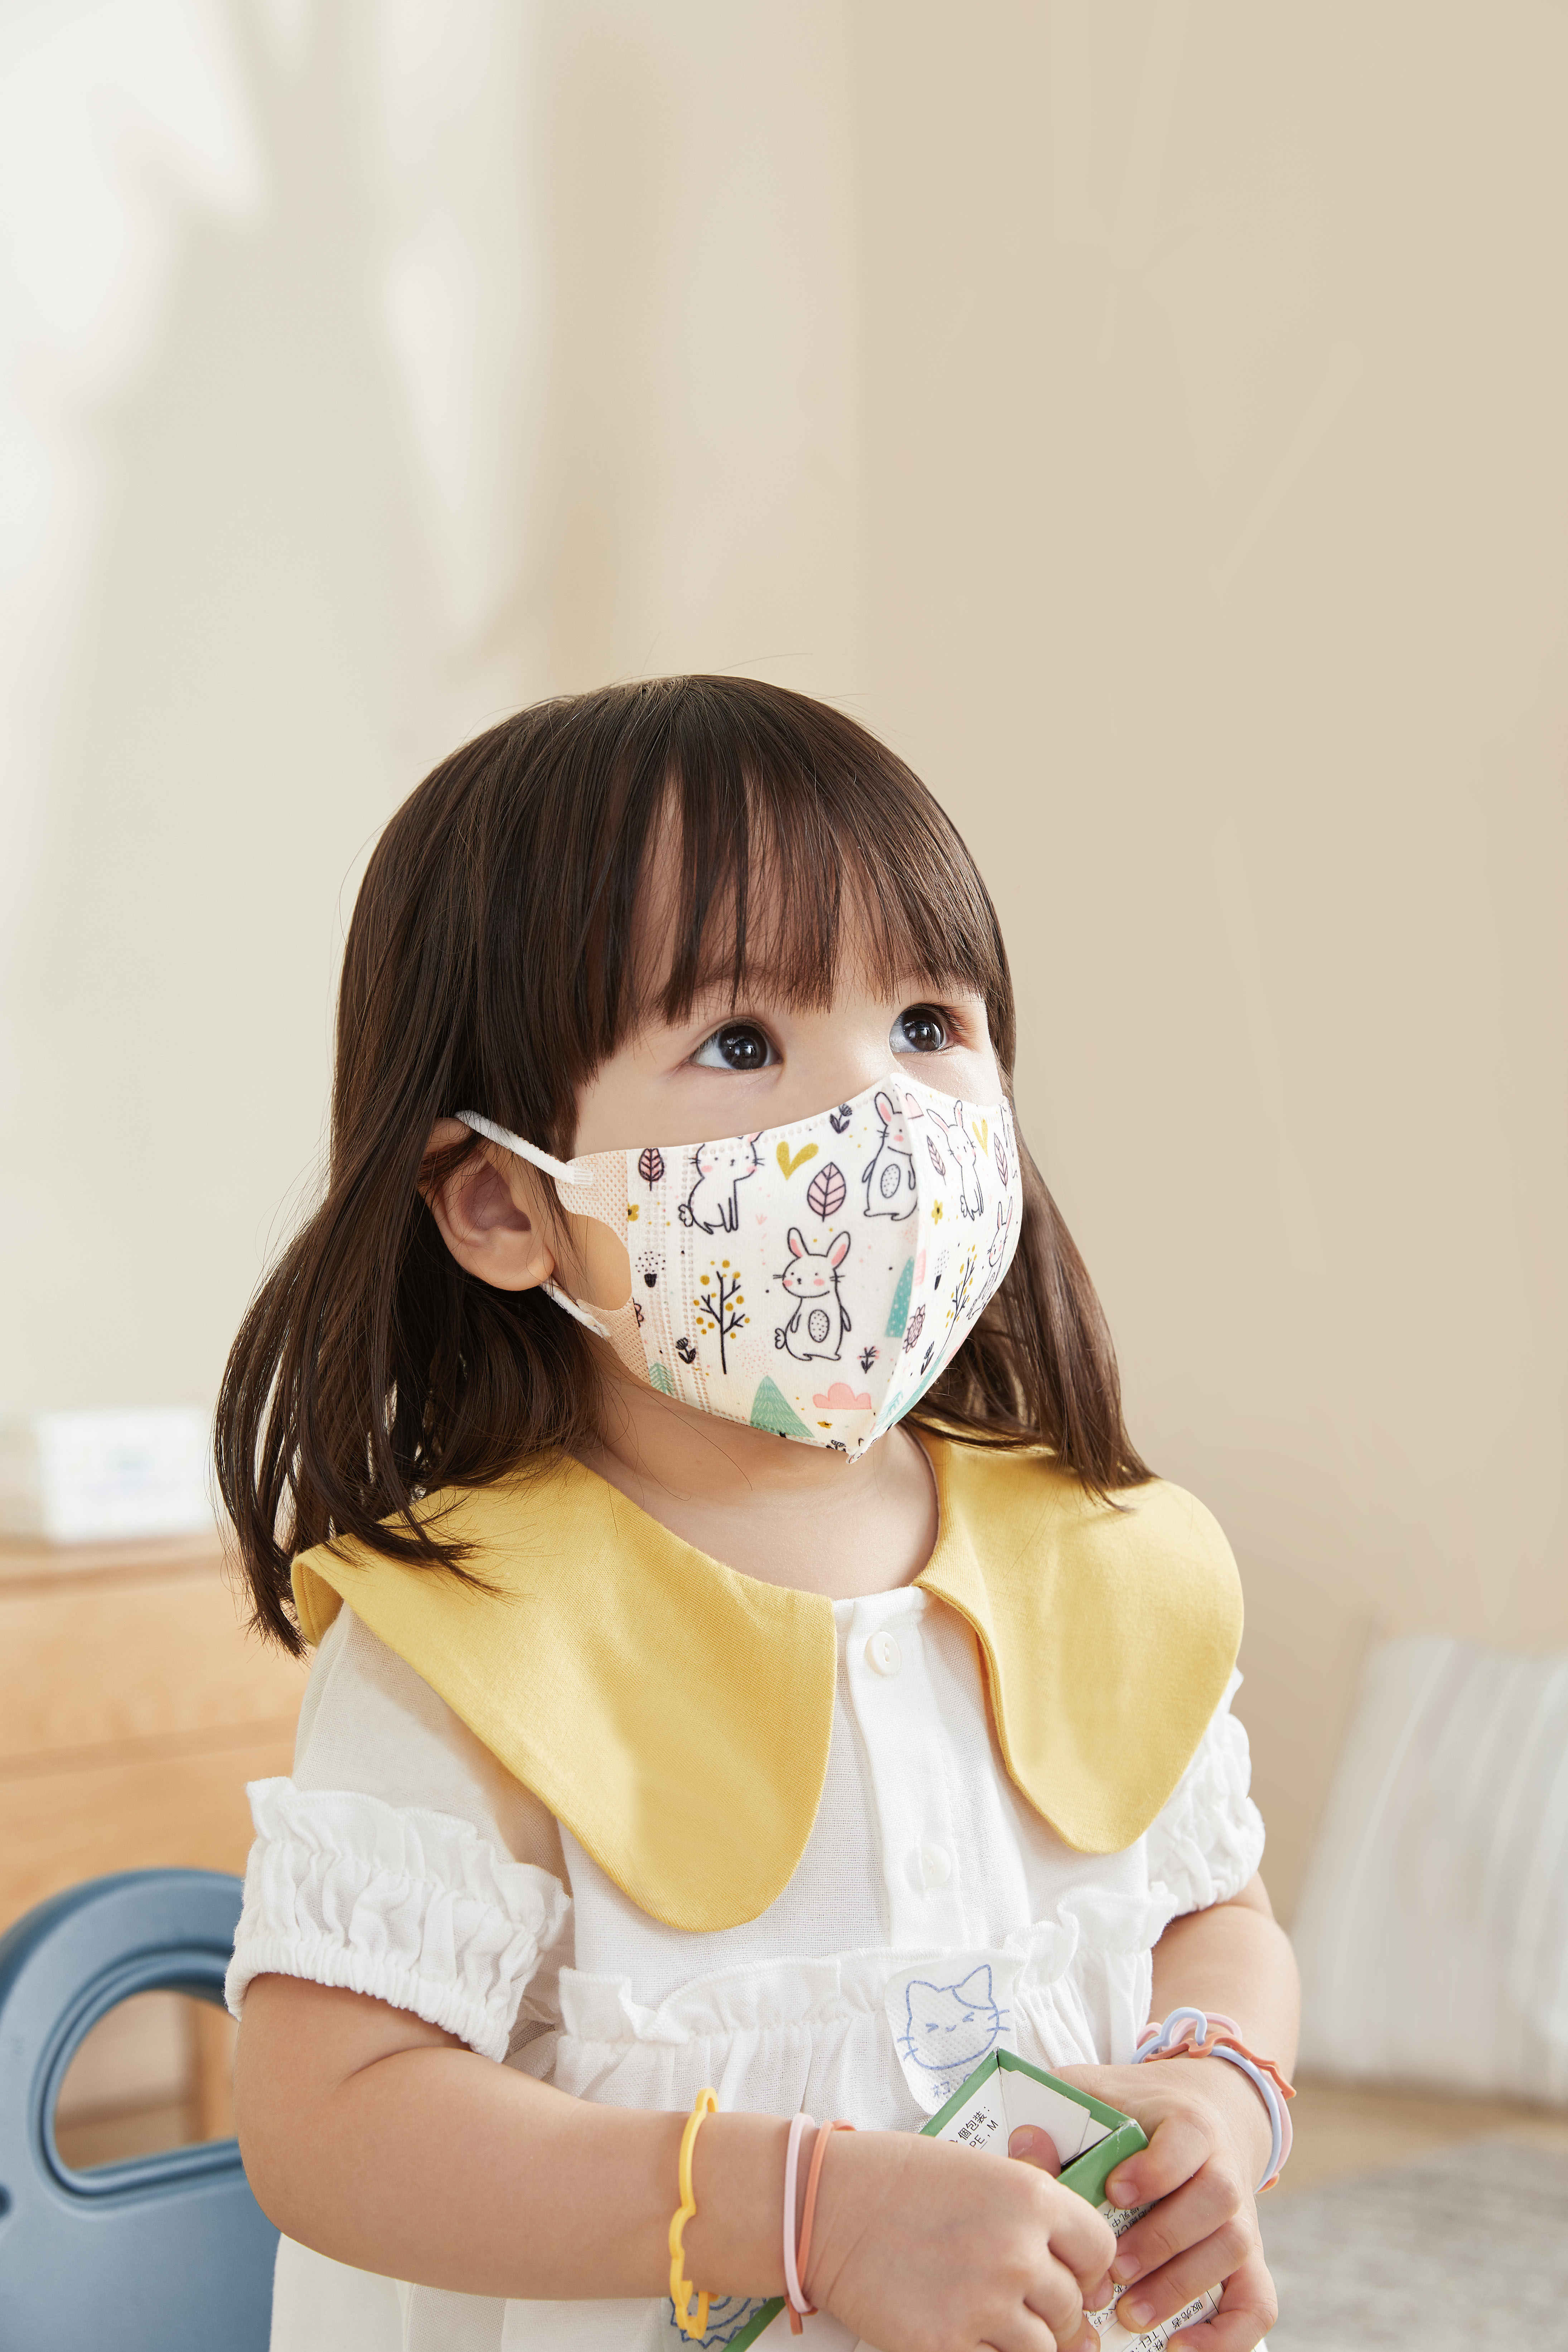 BABY 3D MASK / SPACE BEARのイメージ